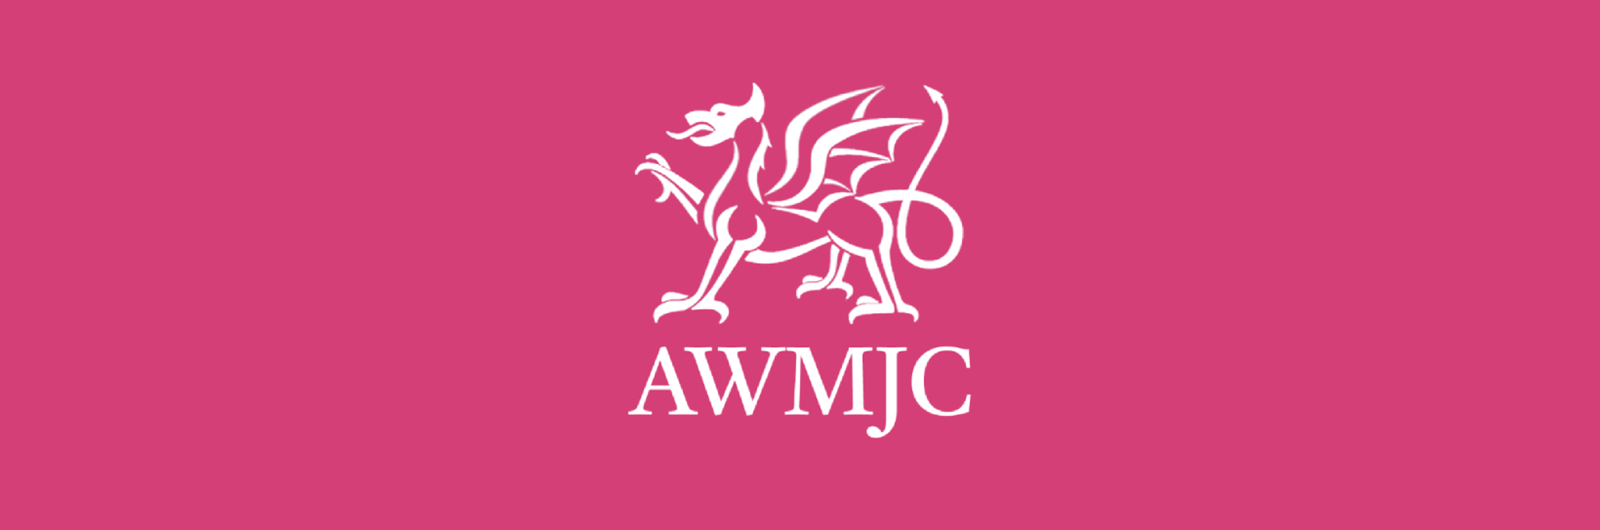 All Wales Midwives Journal Club